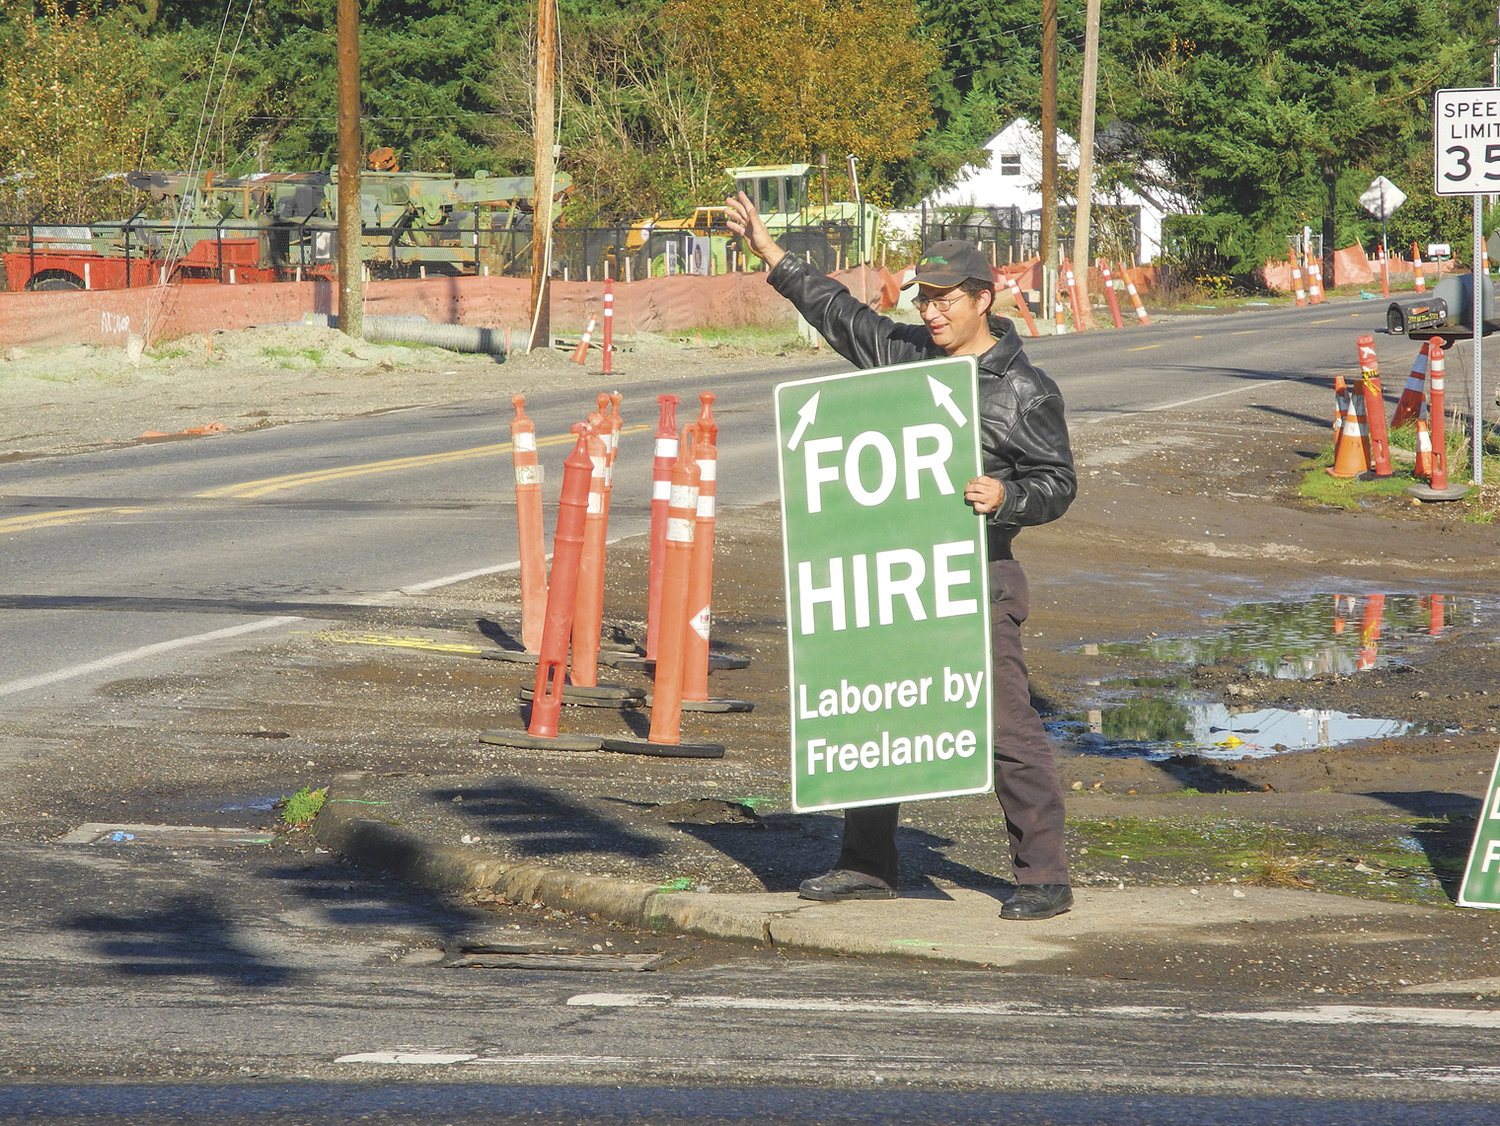 FREELANCE LABORER Lopez takes his usual place at the Dollars Corner intersection as he advertises for work.